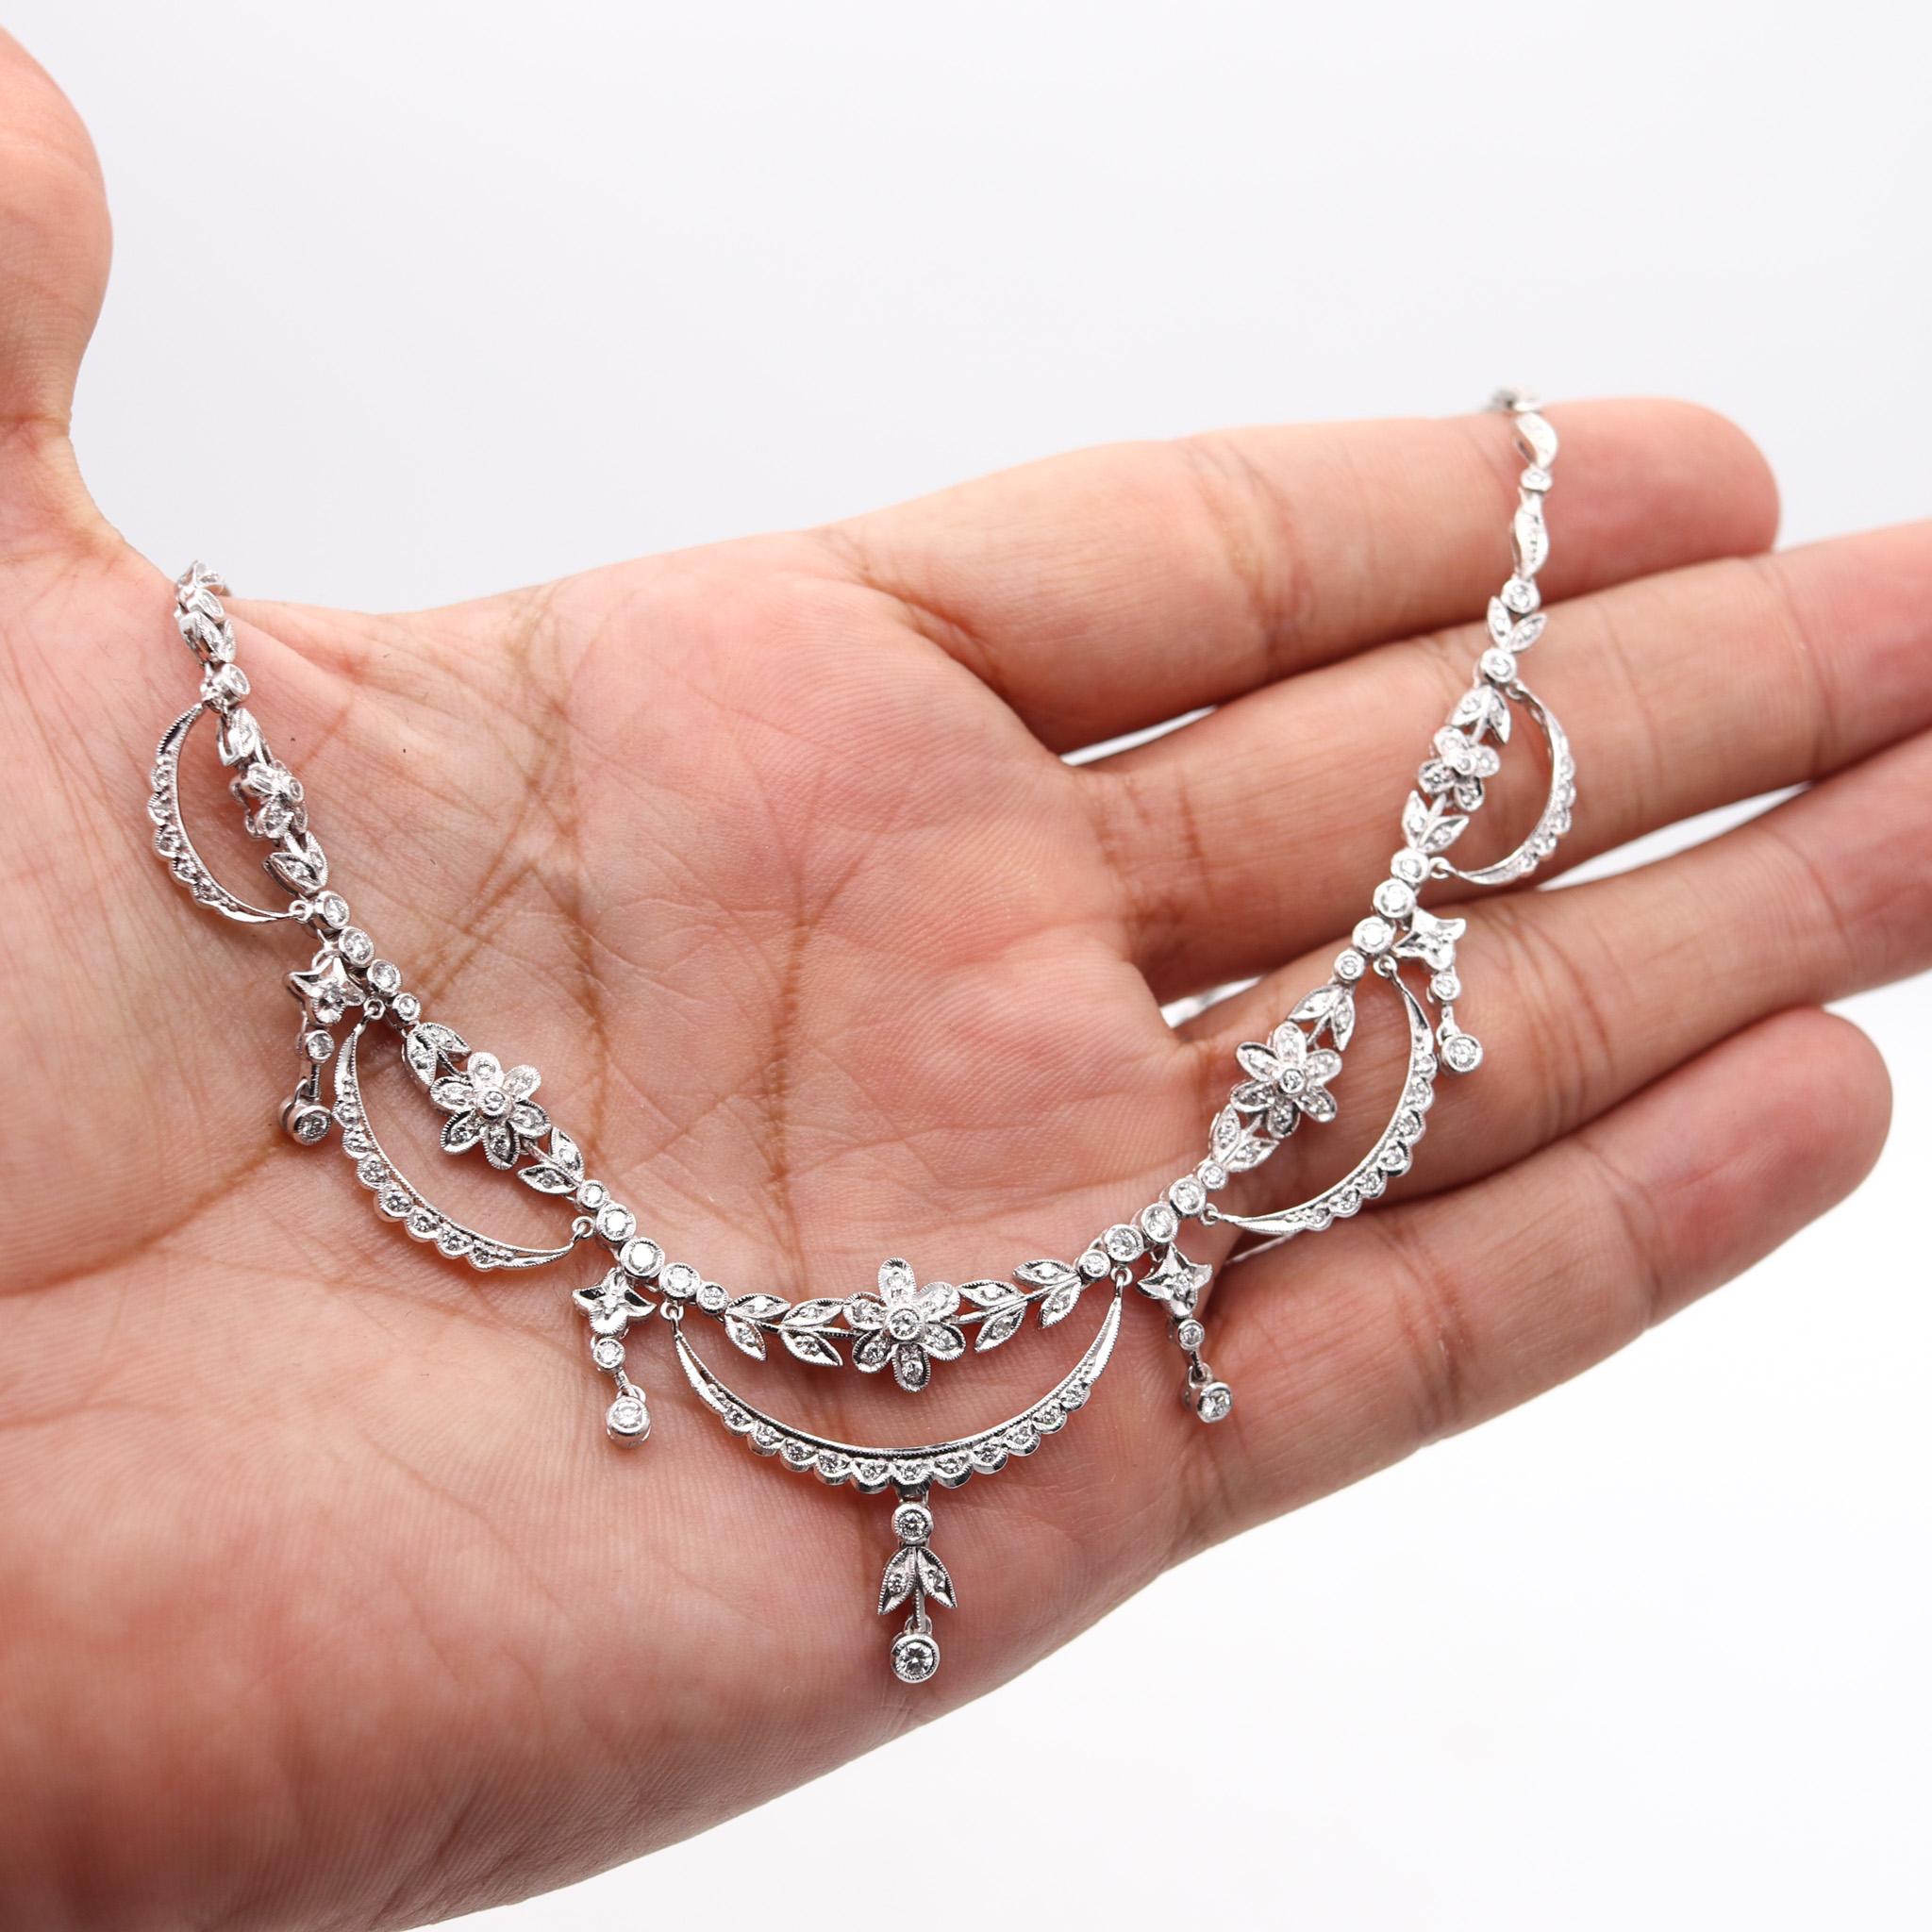 Edwardian 1910 Garlands Necklace In 18Kt White Gold With 3.72 Ctw In Diamonds For Sale 2